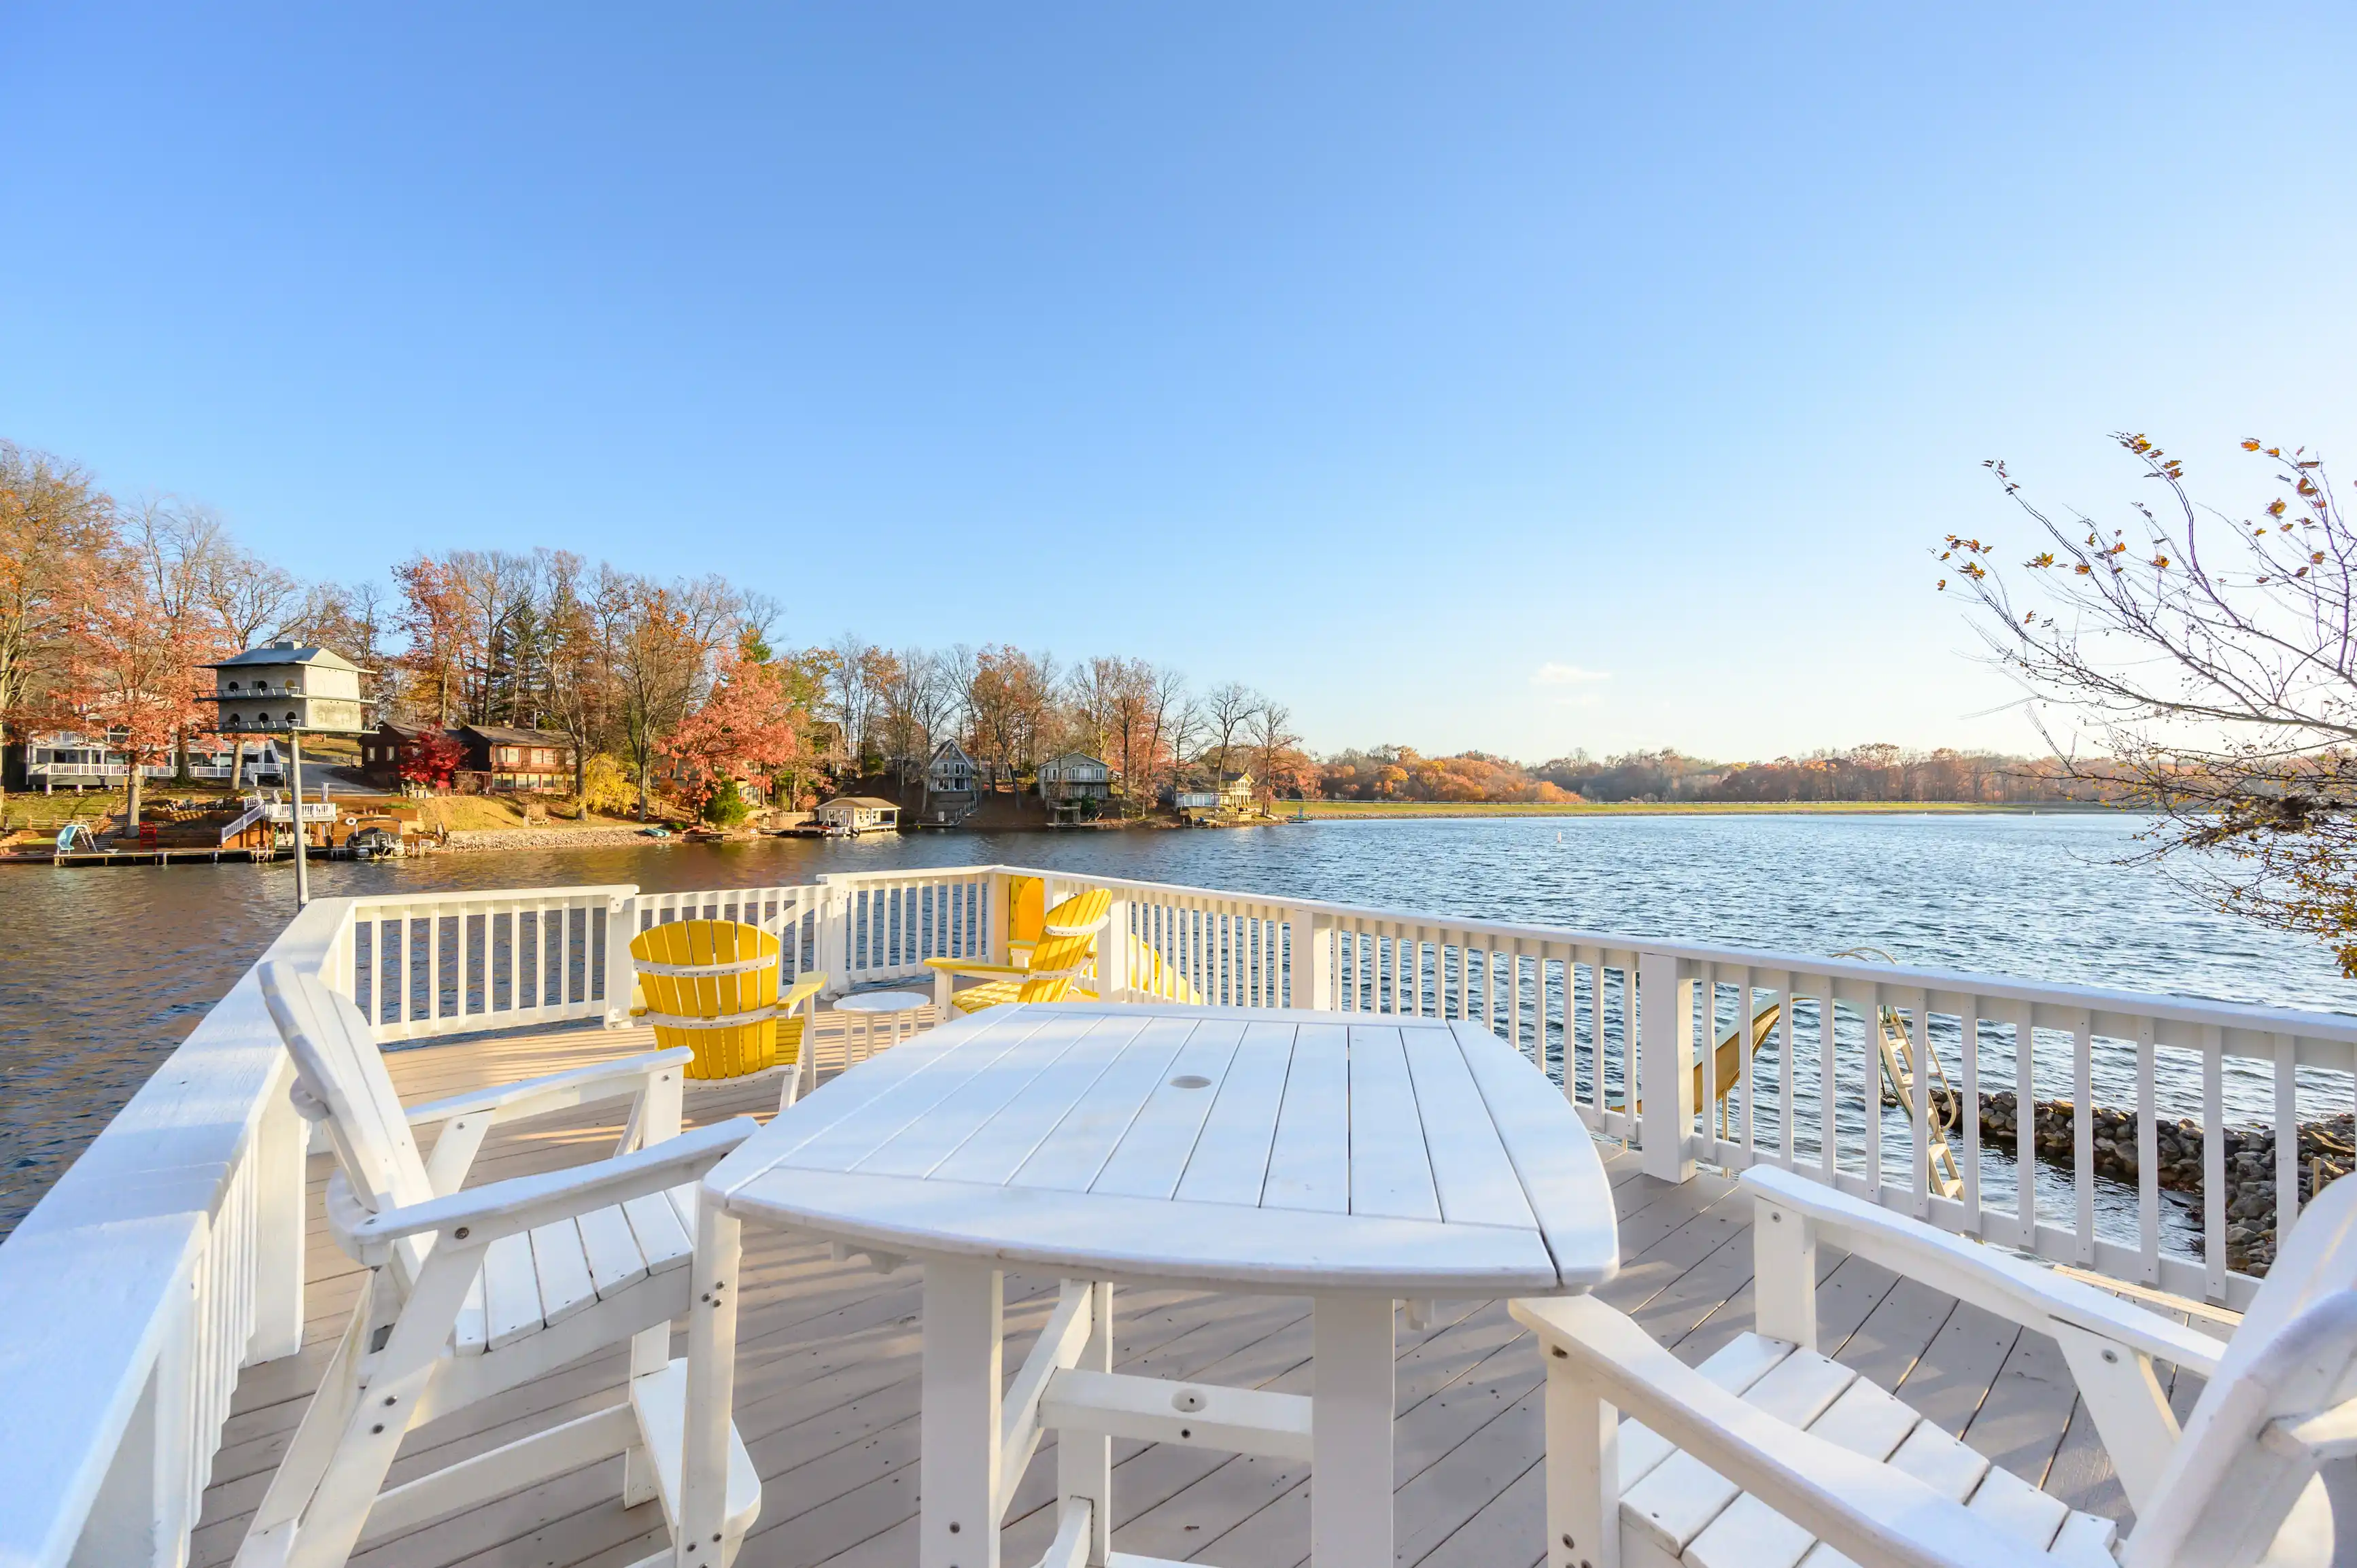 A serene lakeside view from a white deck featuring Adirondack chairs, with autumnal trees and houses in the distance.